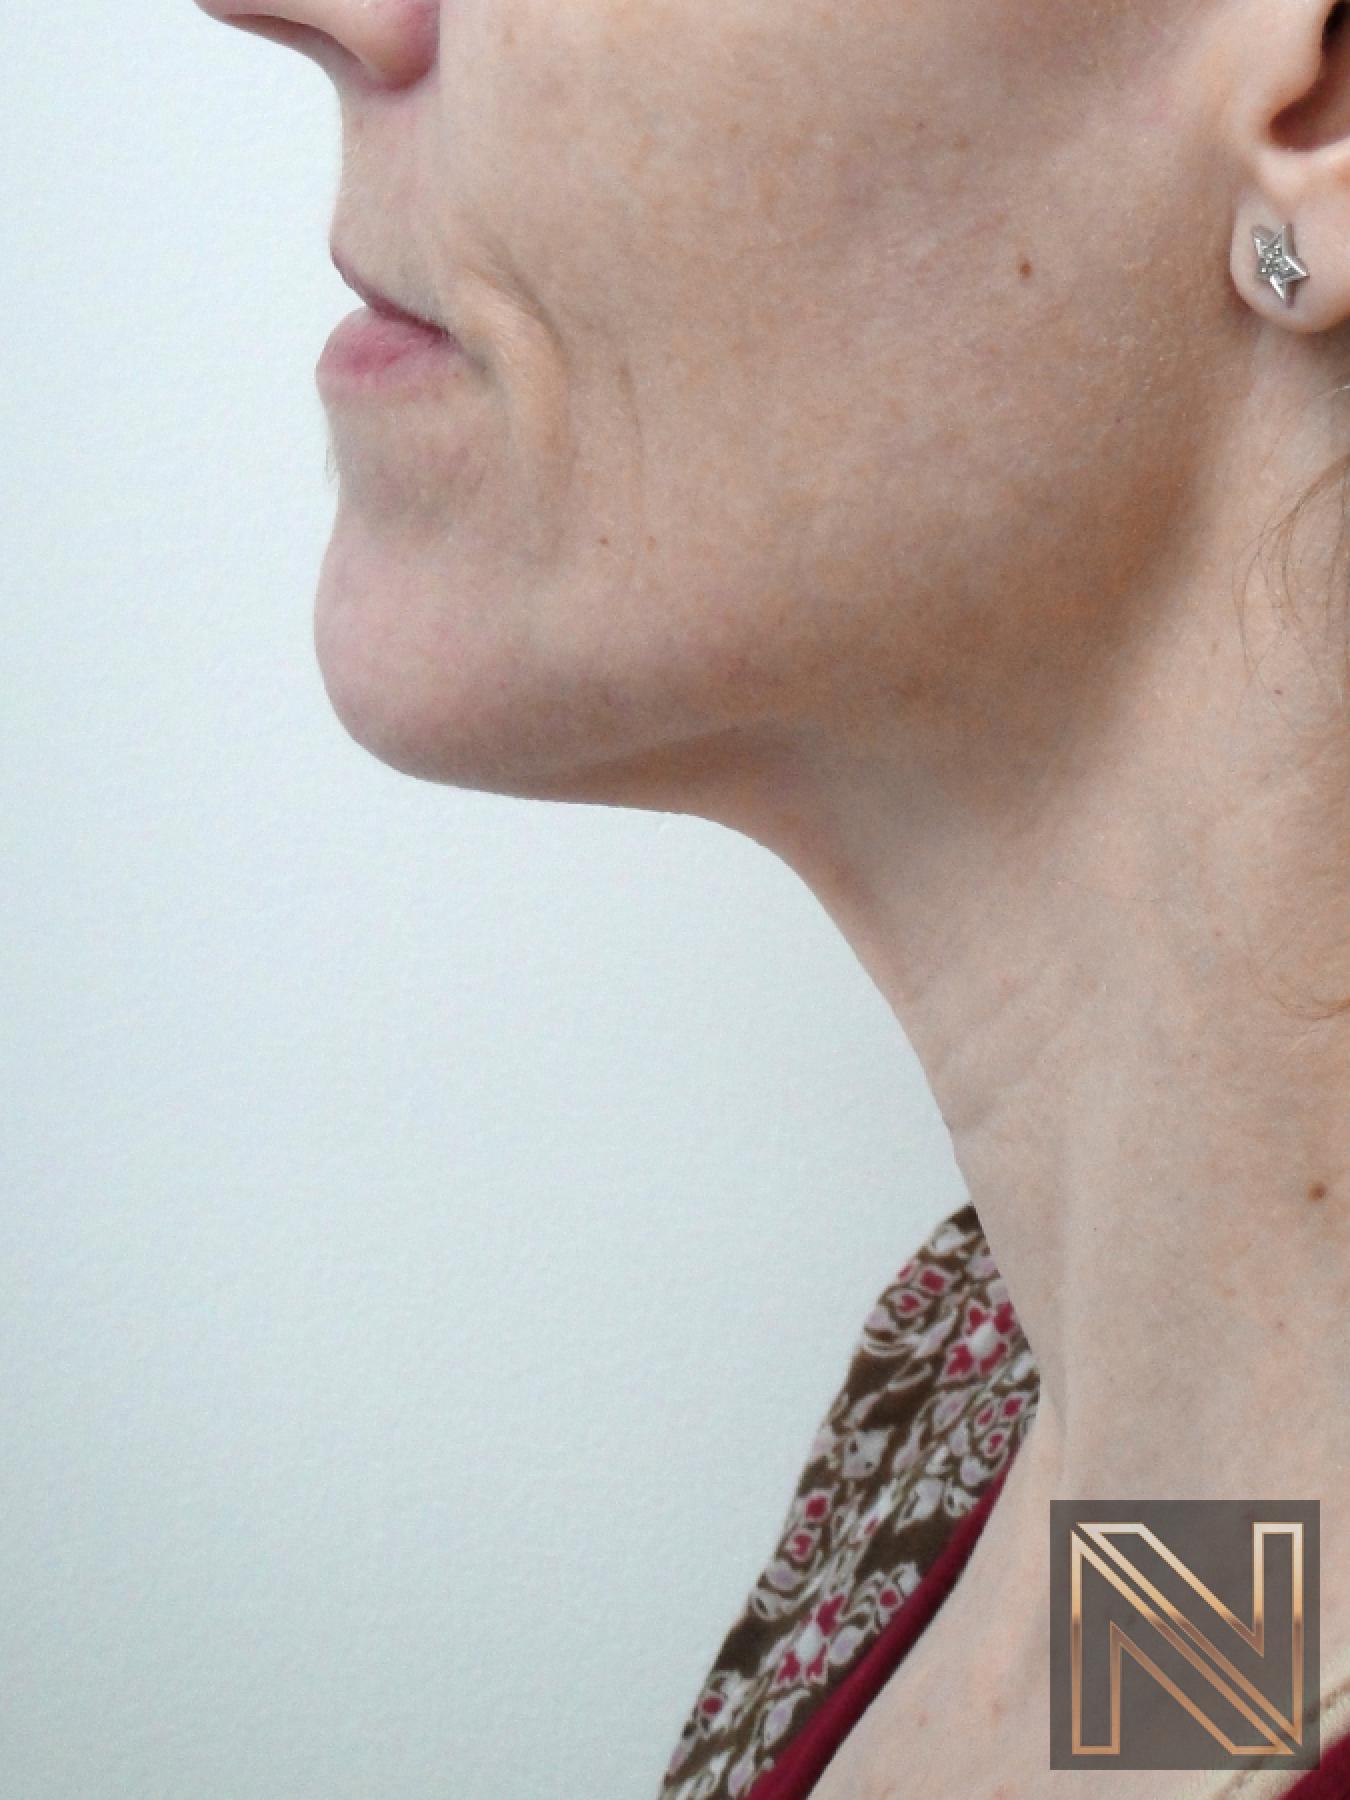 Ultherapy®: Patient 1 - After 1